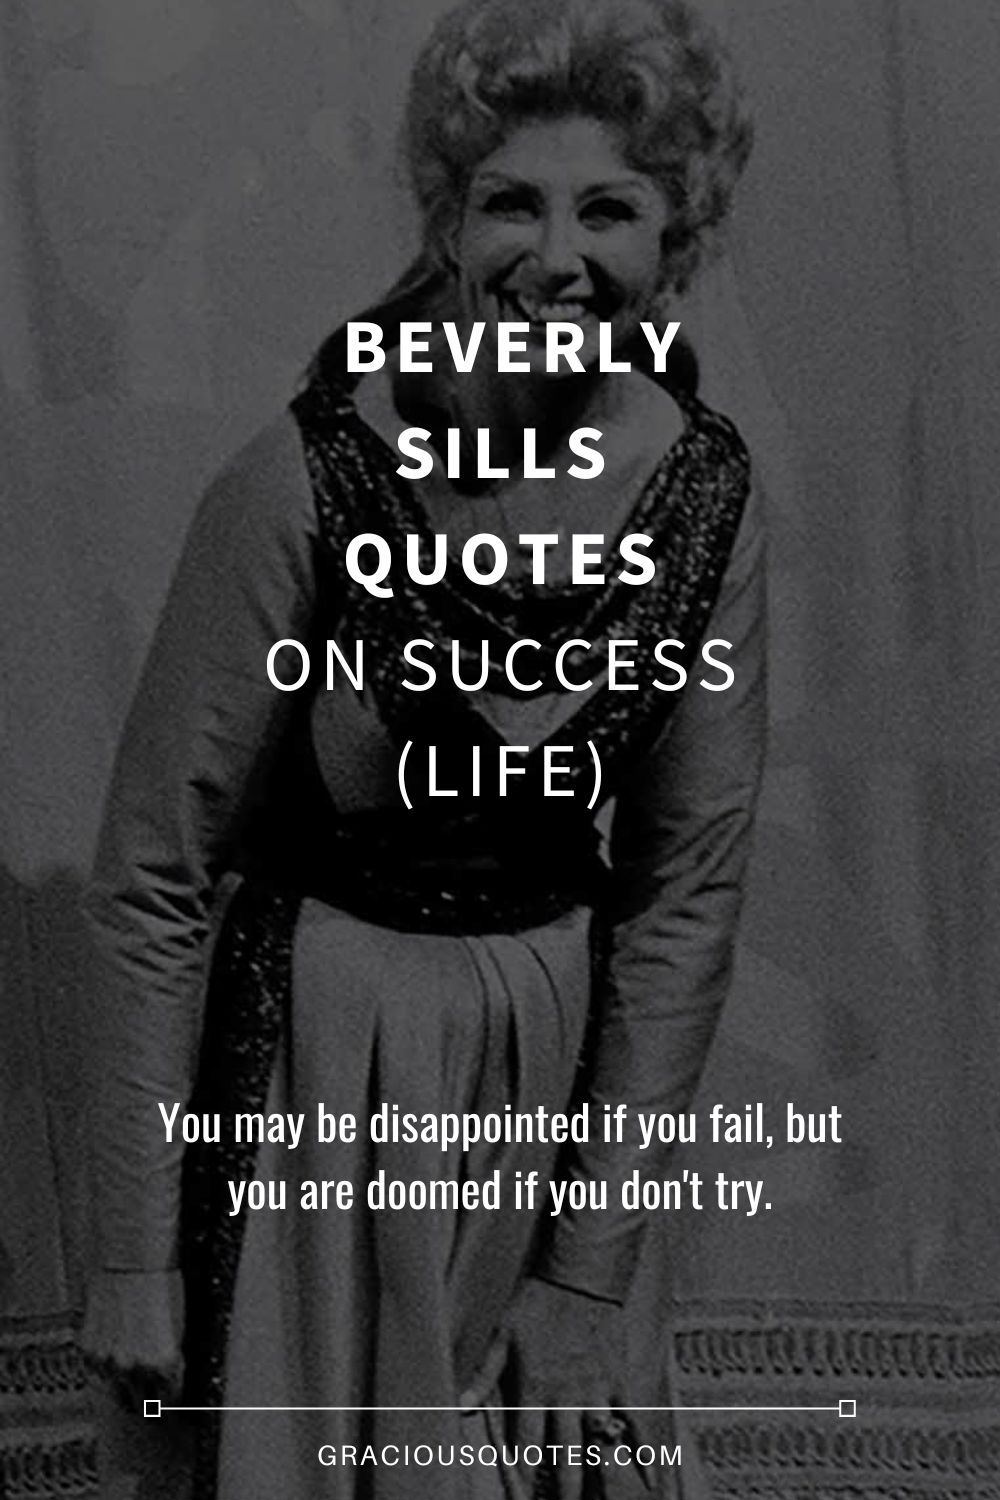 Beverly Sills Quotes on Success (LIFE) - Gracious Quotes